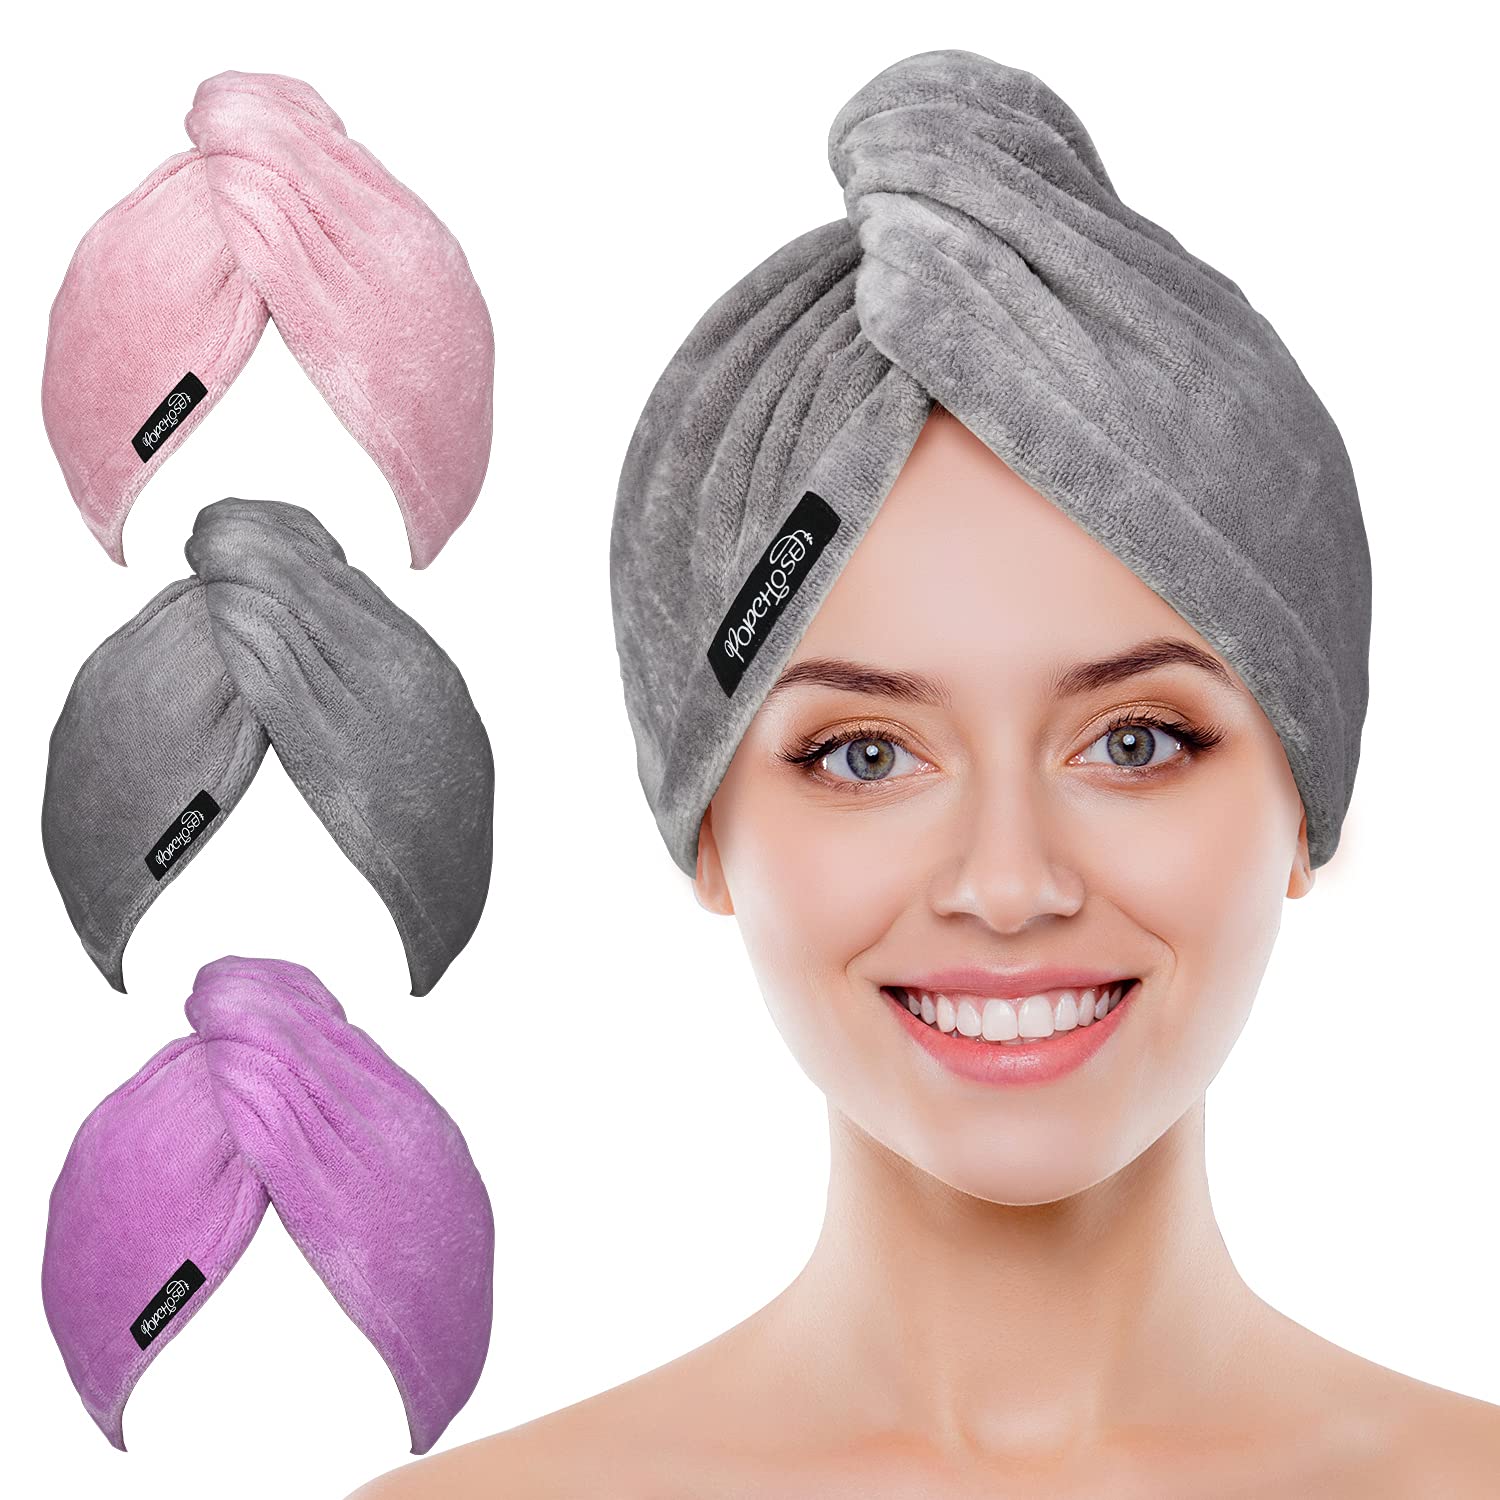 POPCHOSE Microfiber Hair Towel Wrap Ultra Absorbent, Fast Drying Hair Turban Soft, No Frizz Hair Wrap Towels for Women Wet Hair, Curly, Longer, Thicker Hair